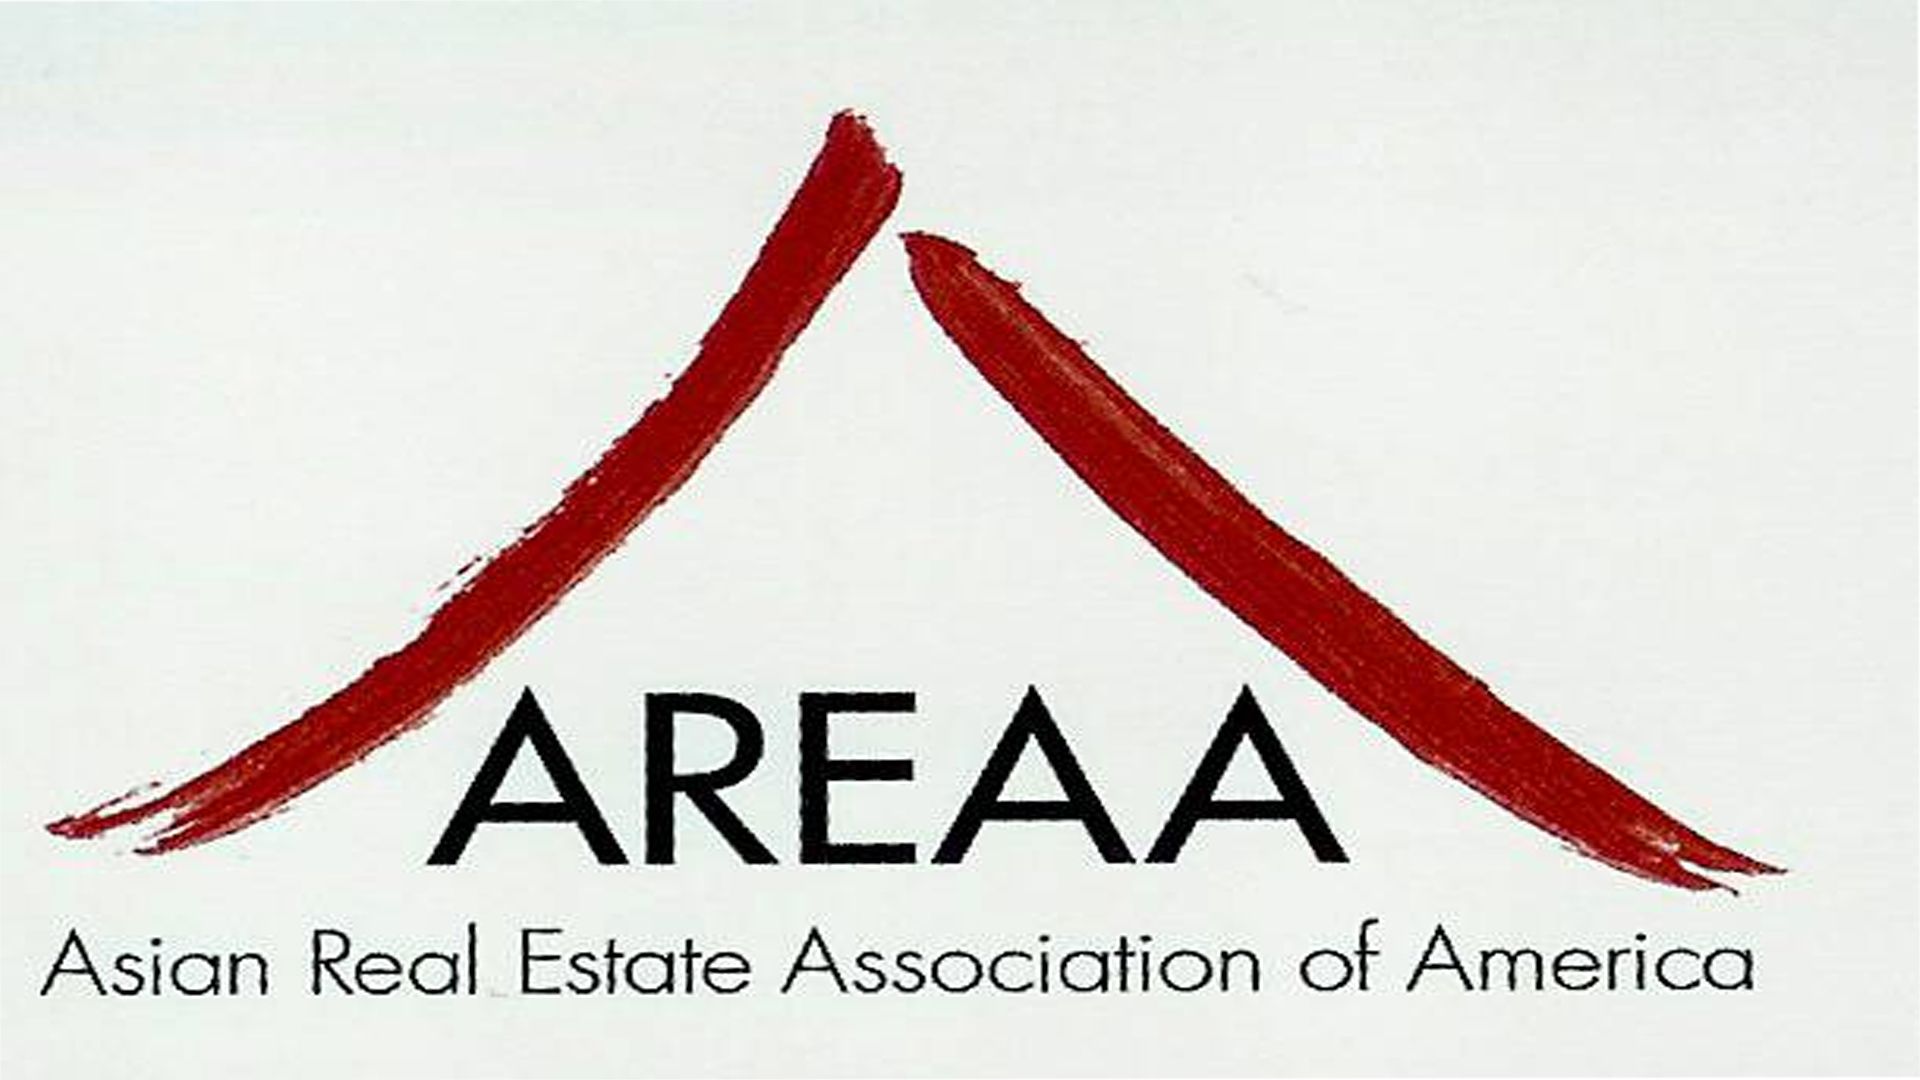 Asian real estate association of america